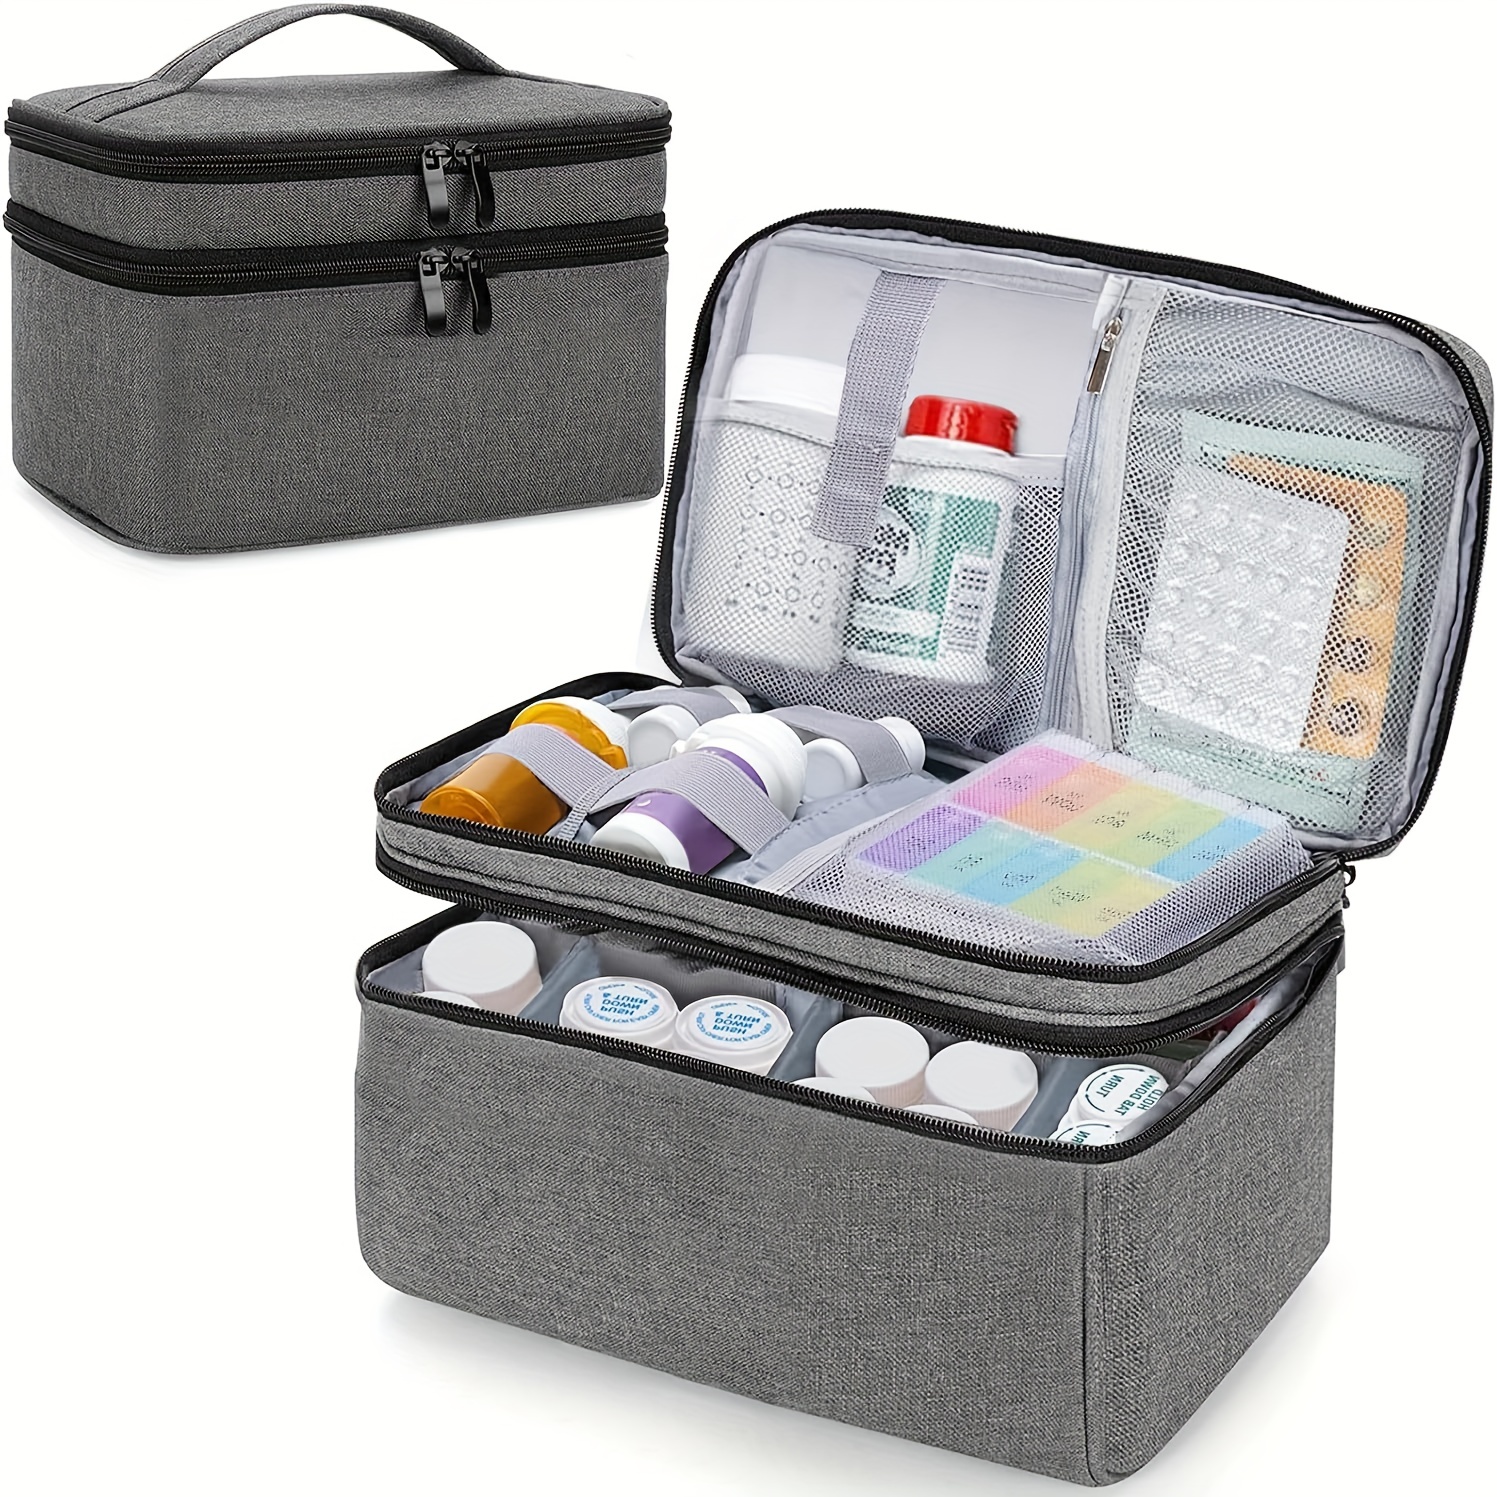 

1 Pc Medicine Organizer And Storage Bag Empty, Family First Aid Box, Pill Bottle Organizer Bag For Emergency Medication, Supplements Or Medical Kits, Zippered Medicine Bag For Home And Travel (gray)